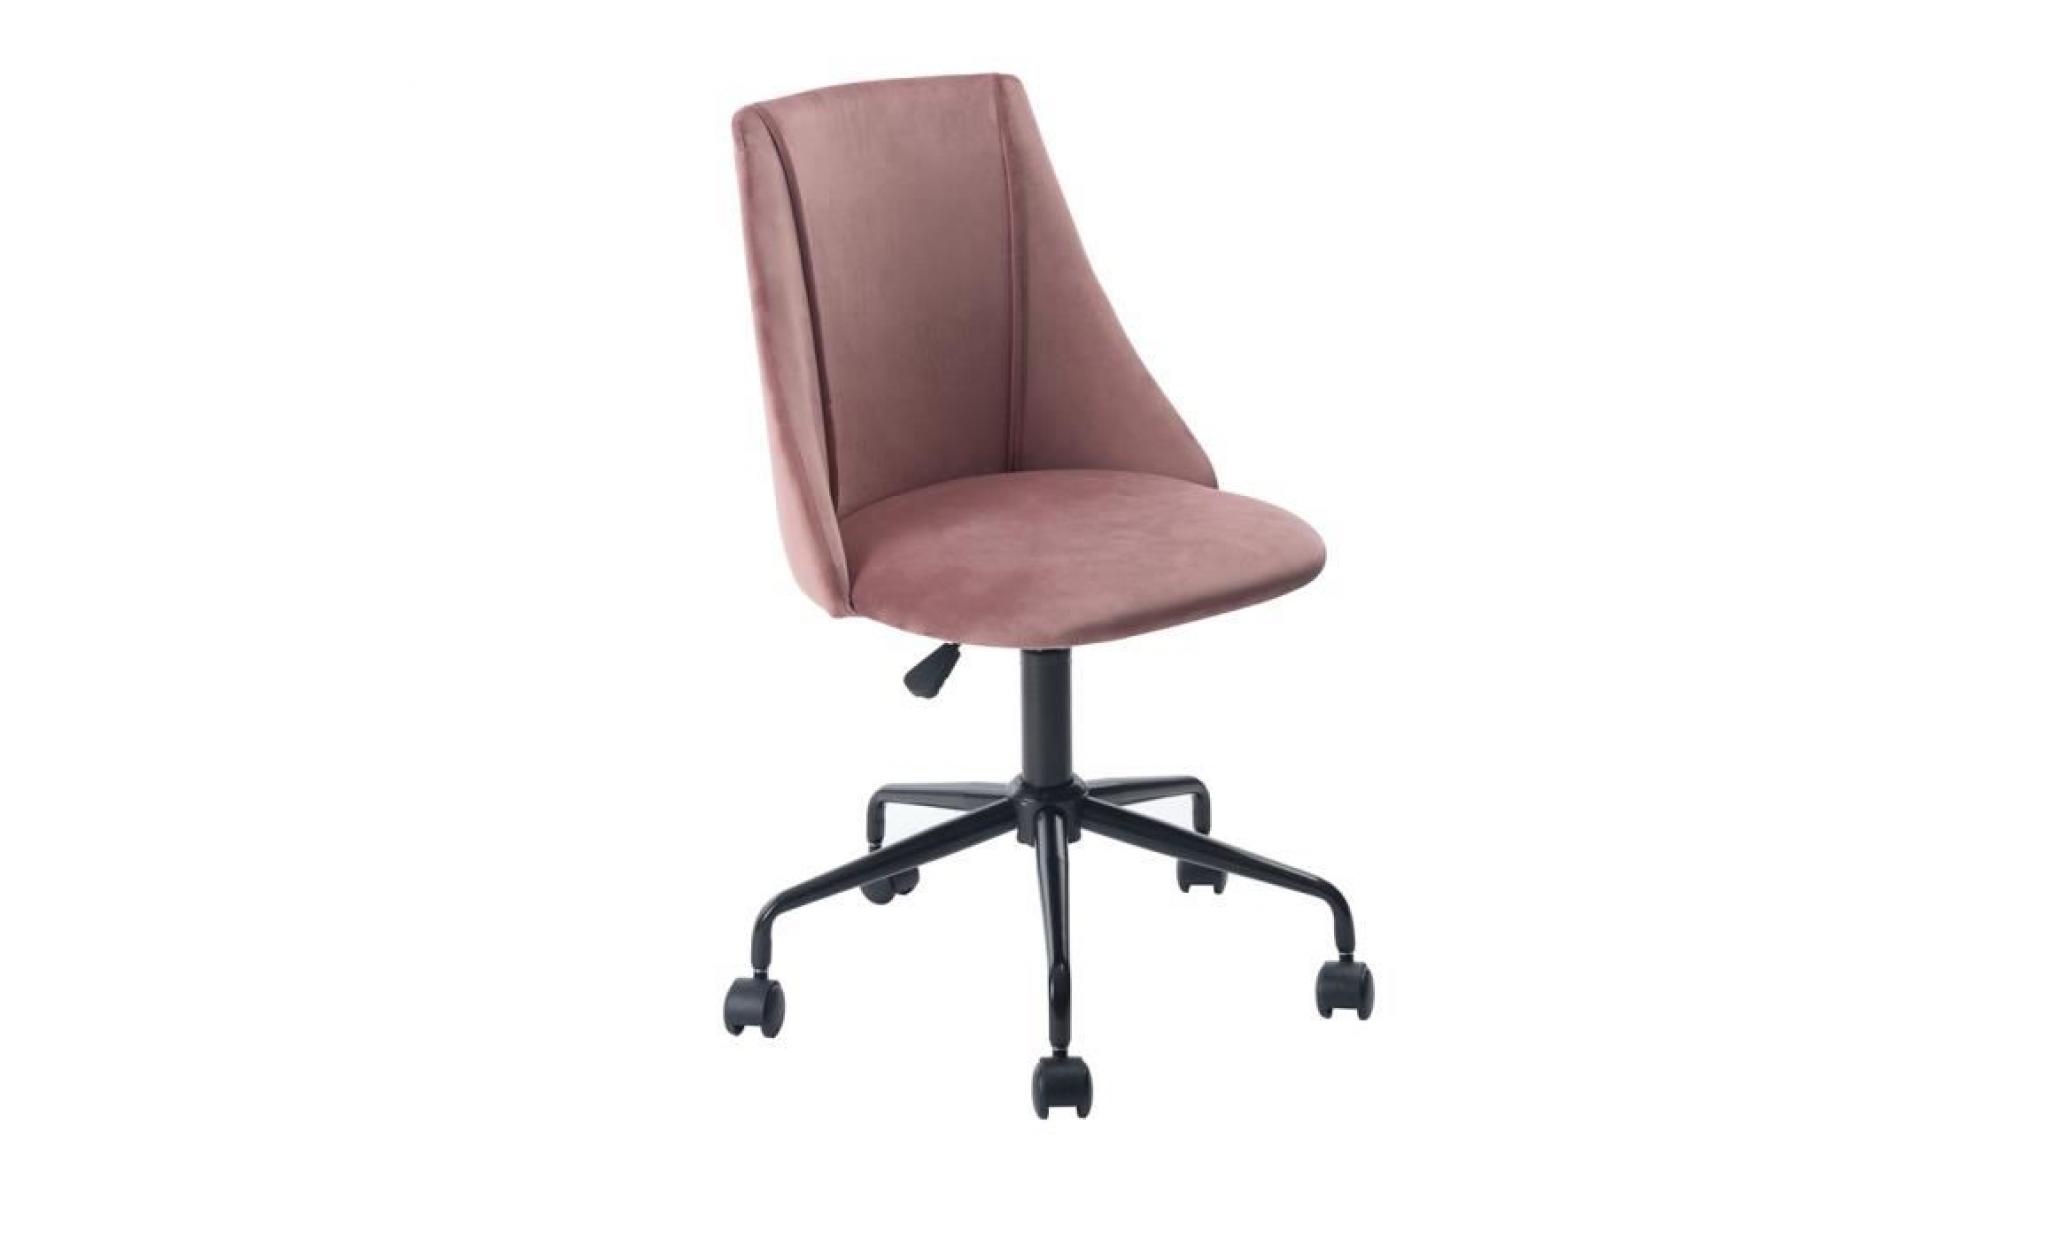 furnish 1 velvet office chair padded velvet foam seat with rotation height and casters,rose